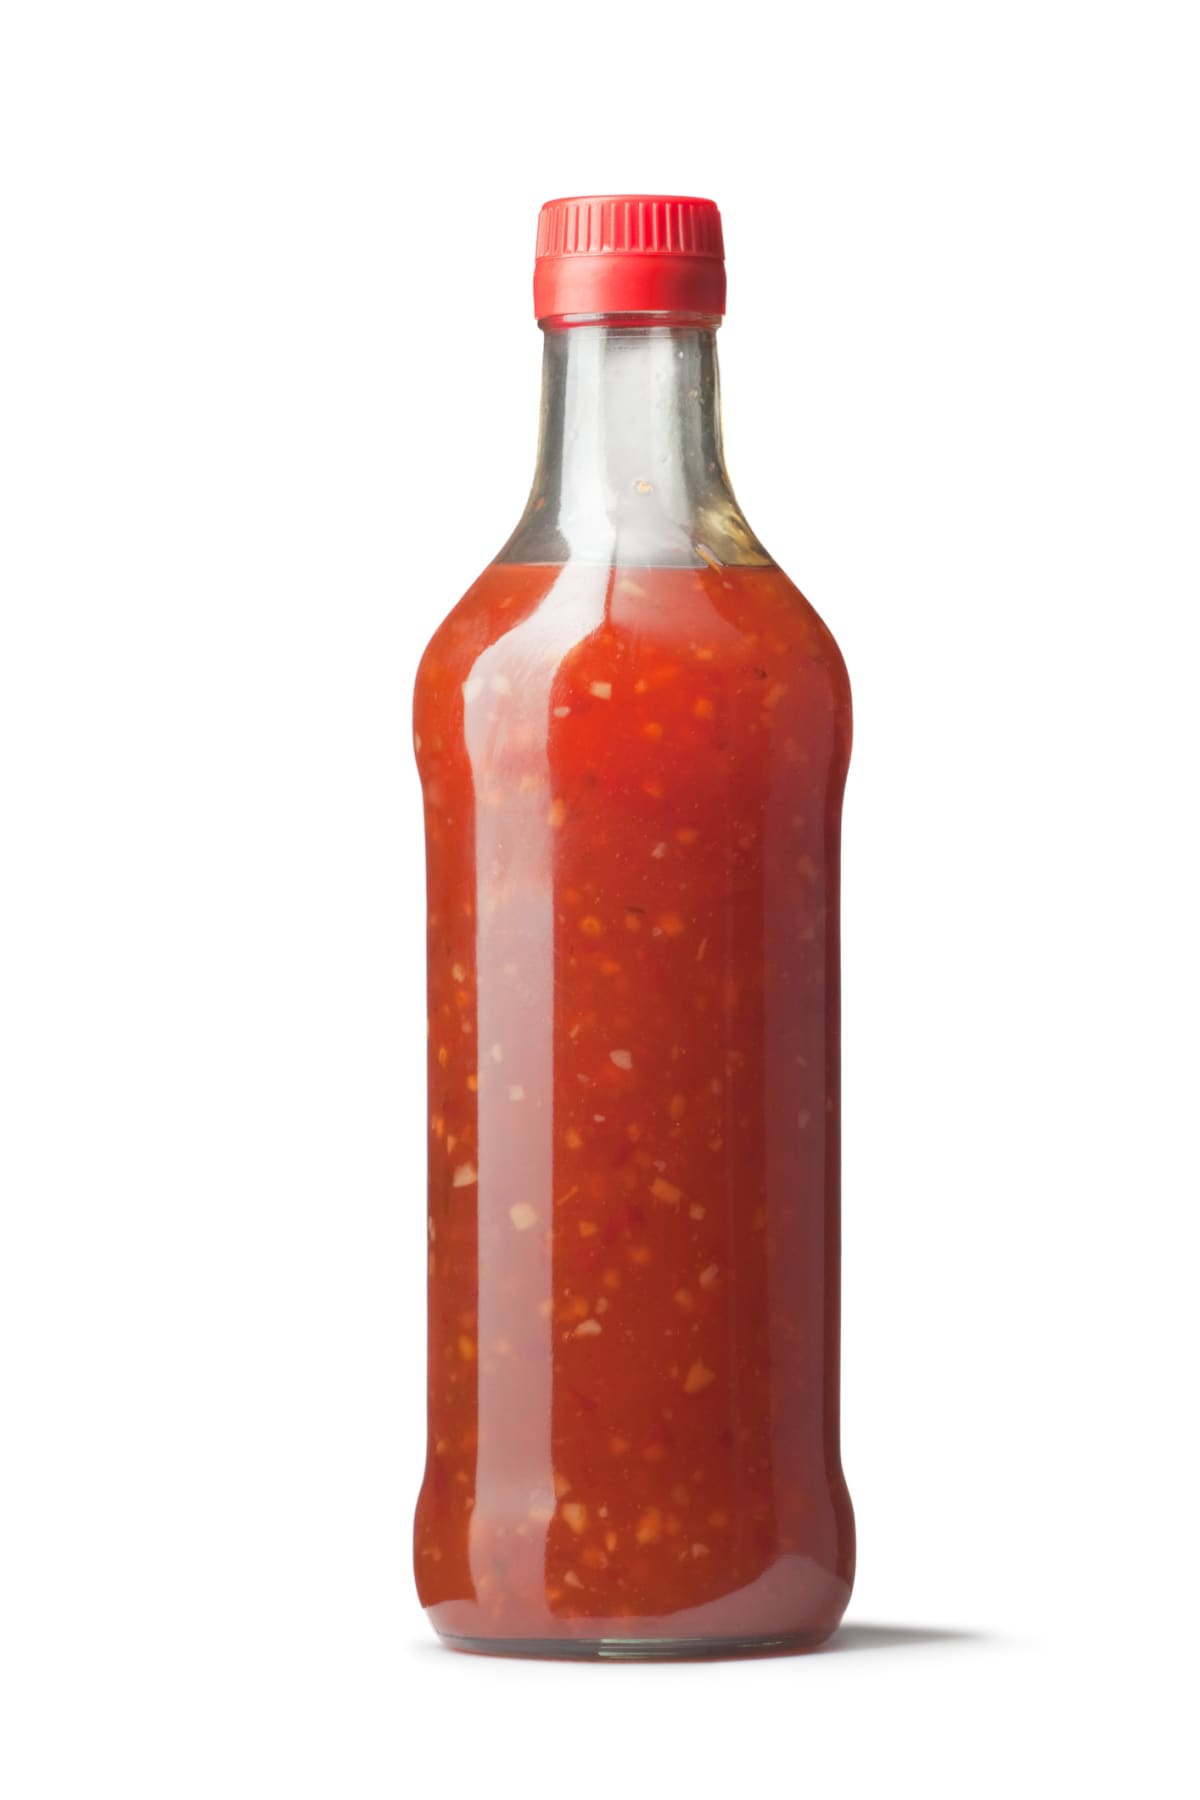 Bottle of hot sauce with white background